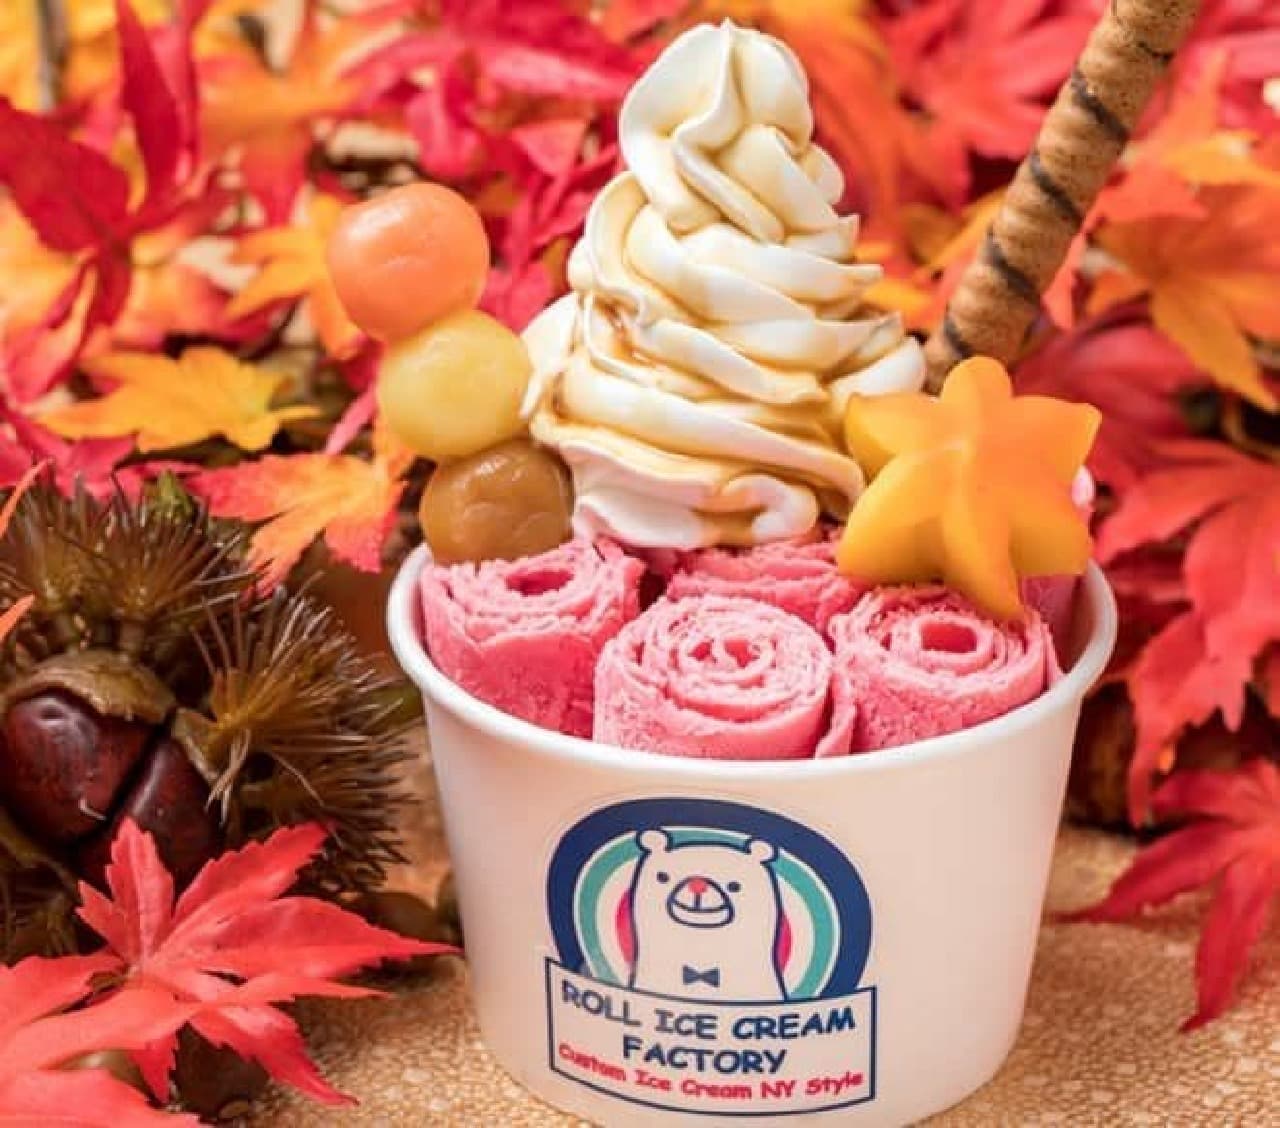 "Raspberry Autumn" is a raspberry milk-based ice cream topped with three-color dumplings, chocolate sticks, and autumnal sweets.